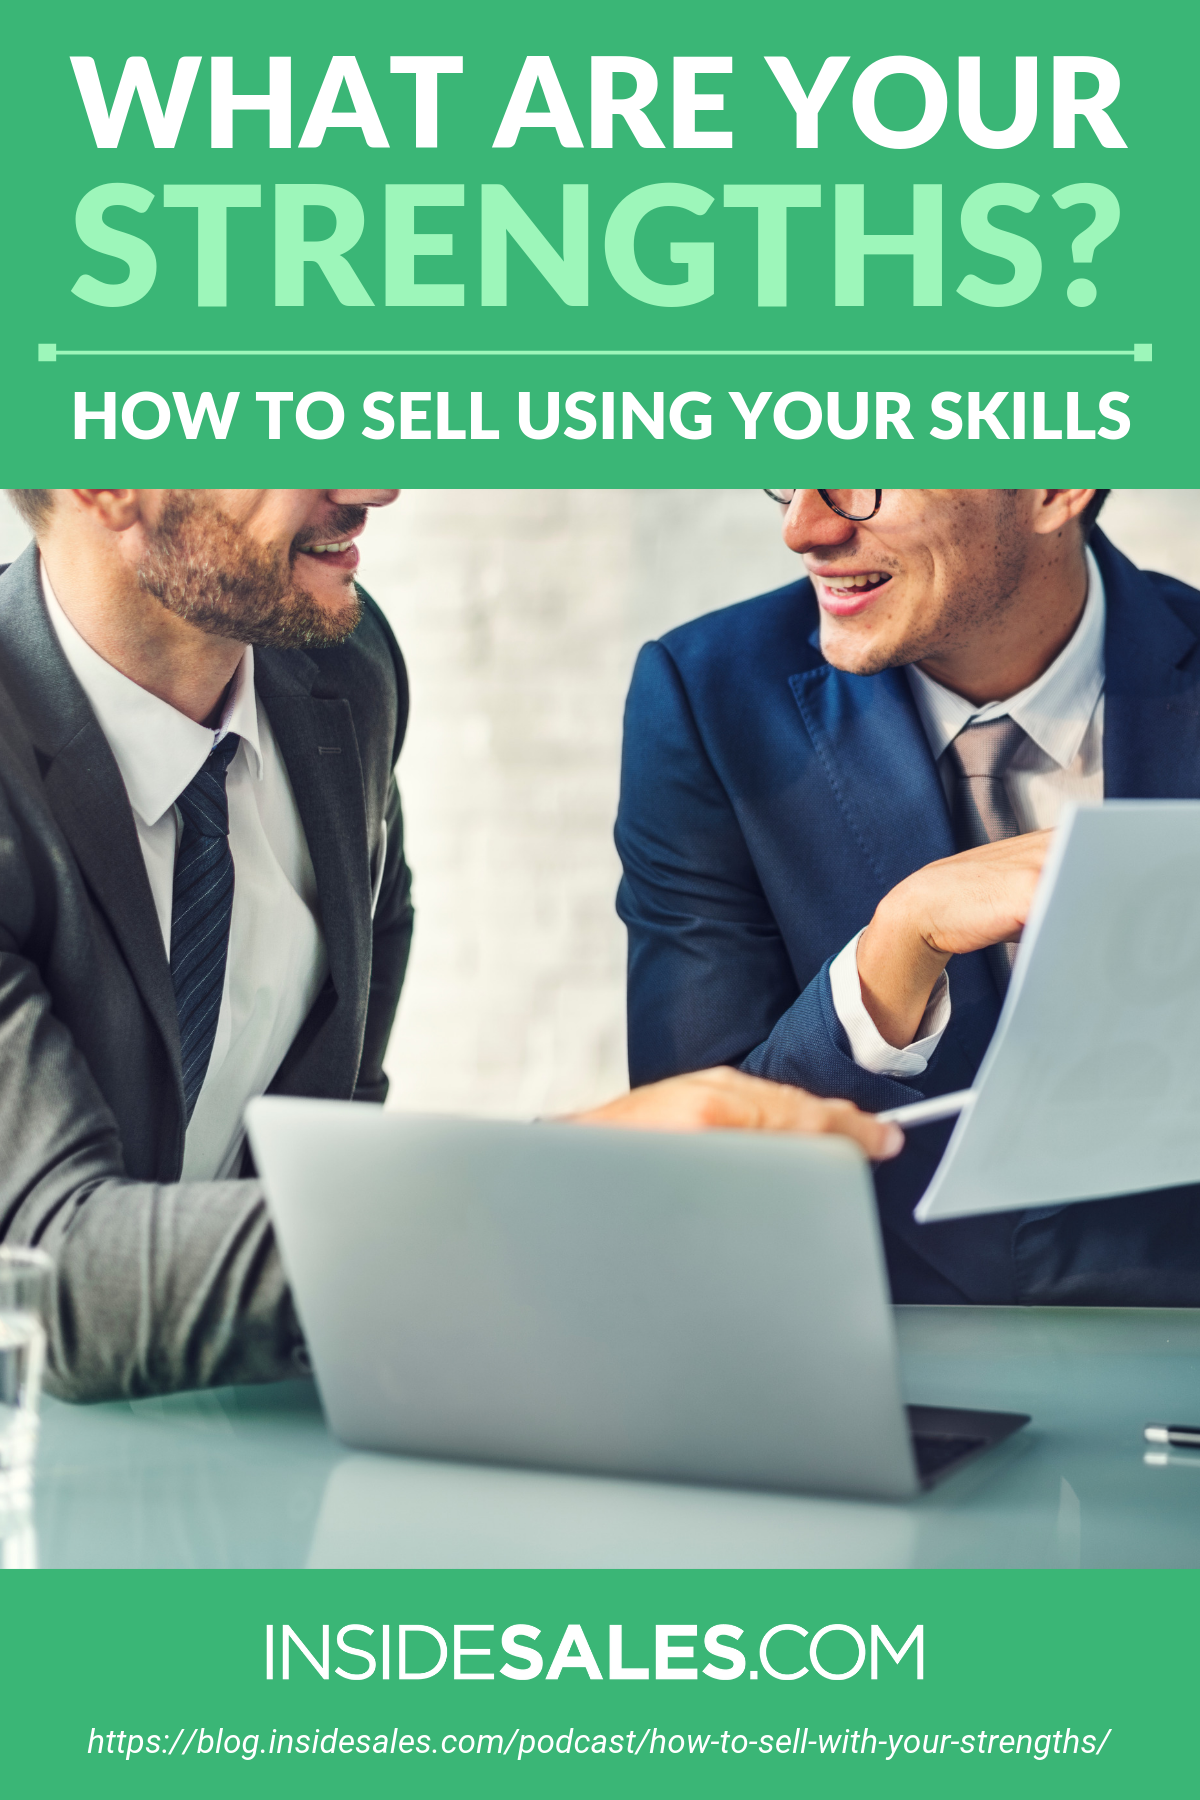 What Are Your Strengths And How To Sell Using Your Skills https://www.insidesales.com/blog/podcast/how-to-sell-with-your-strengths/